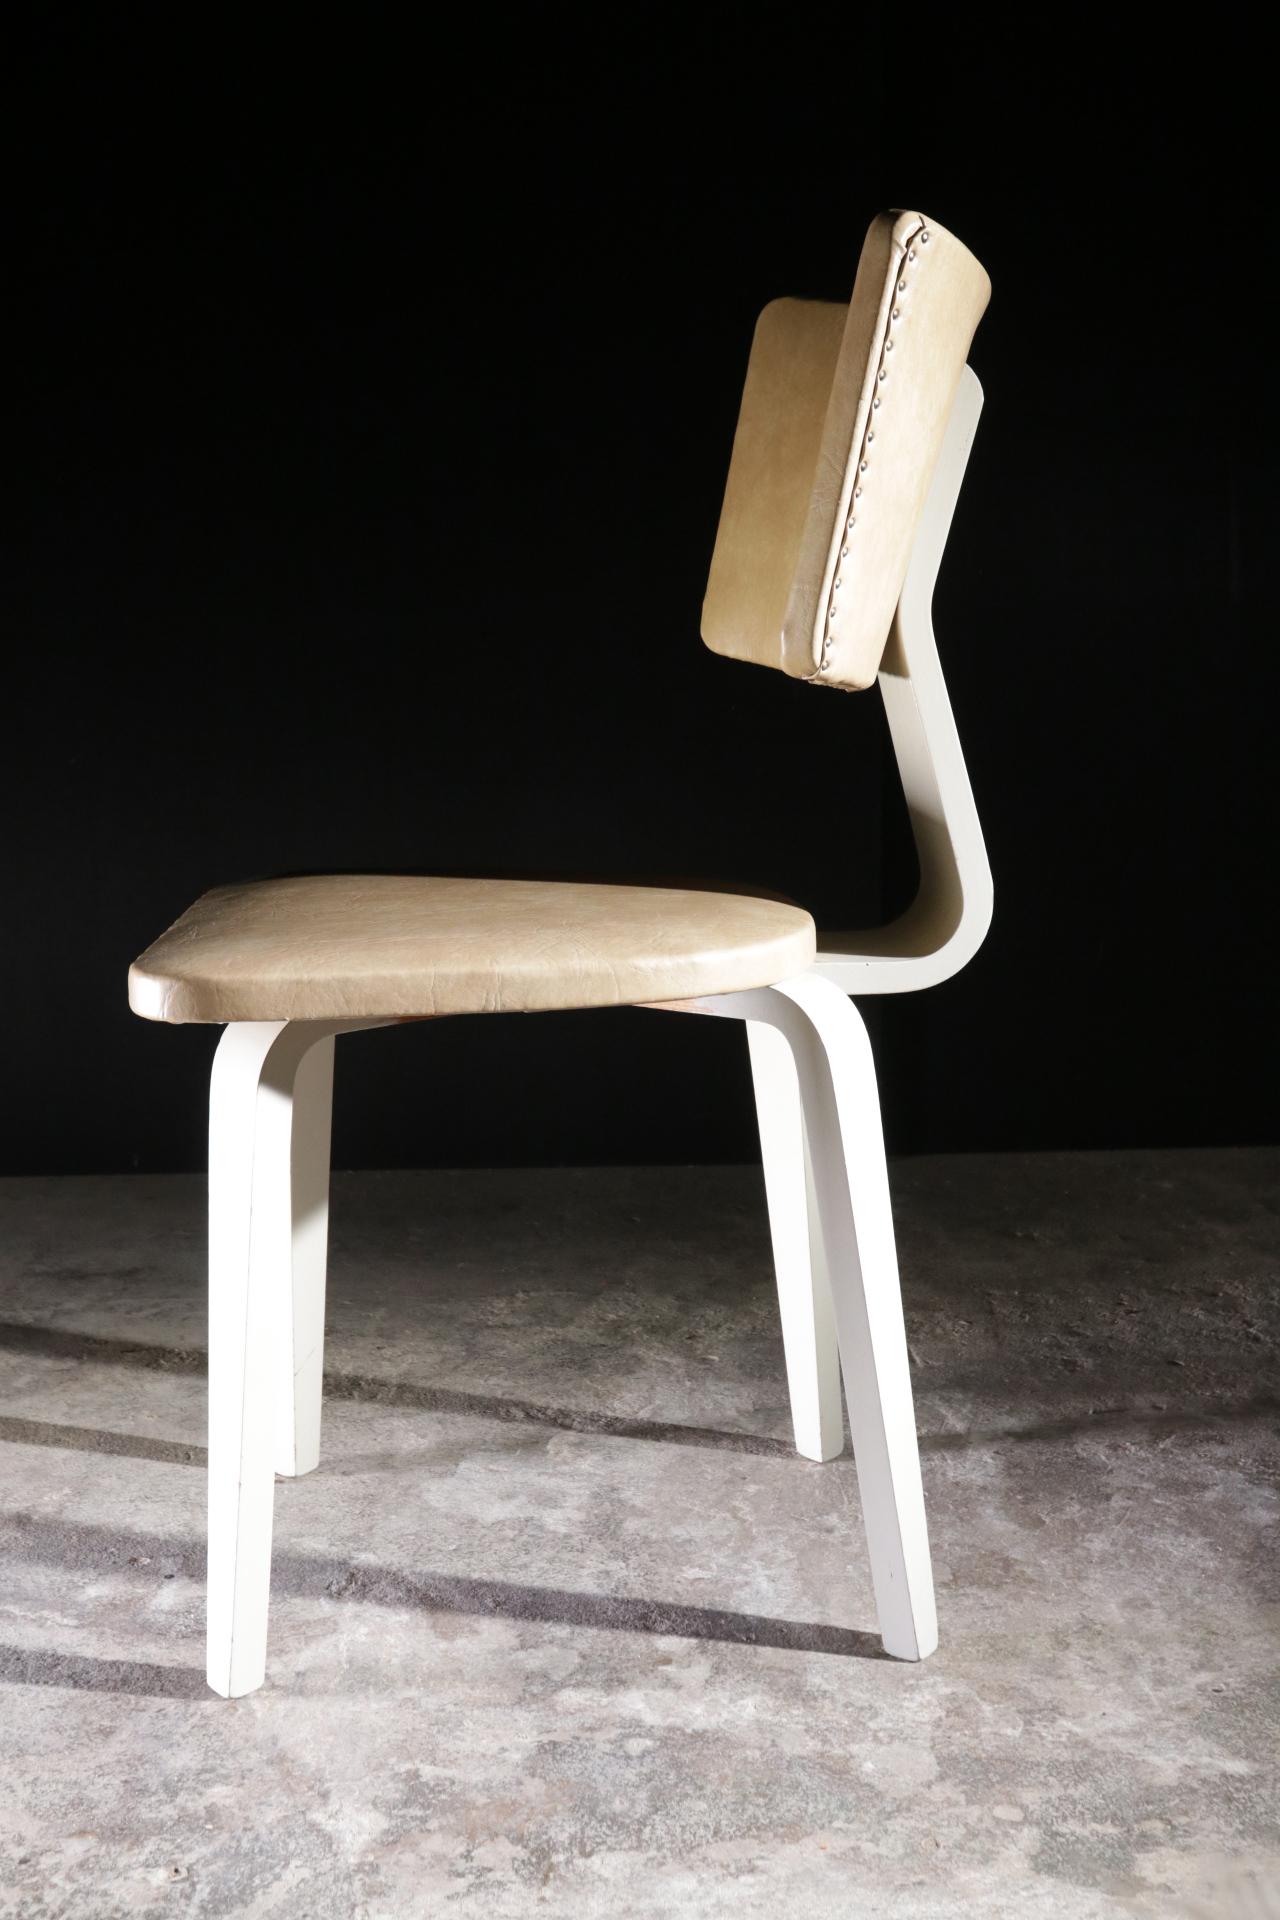 20th Century Mid-Century Dining Chair by Cor Alons, Gouda Den Boer Gouda, 1949 For Sale